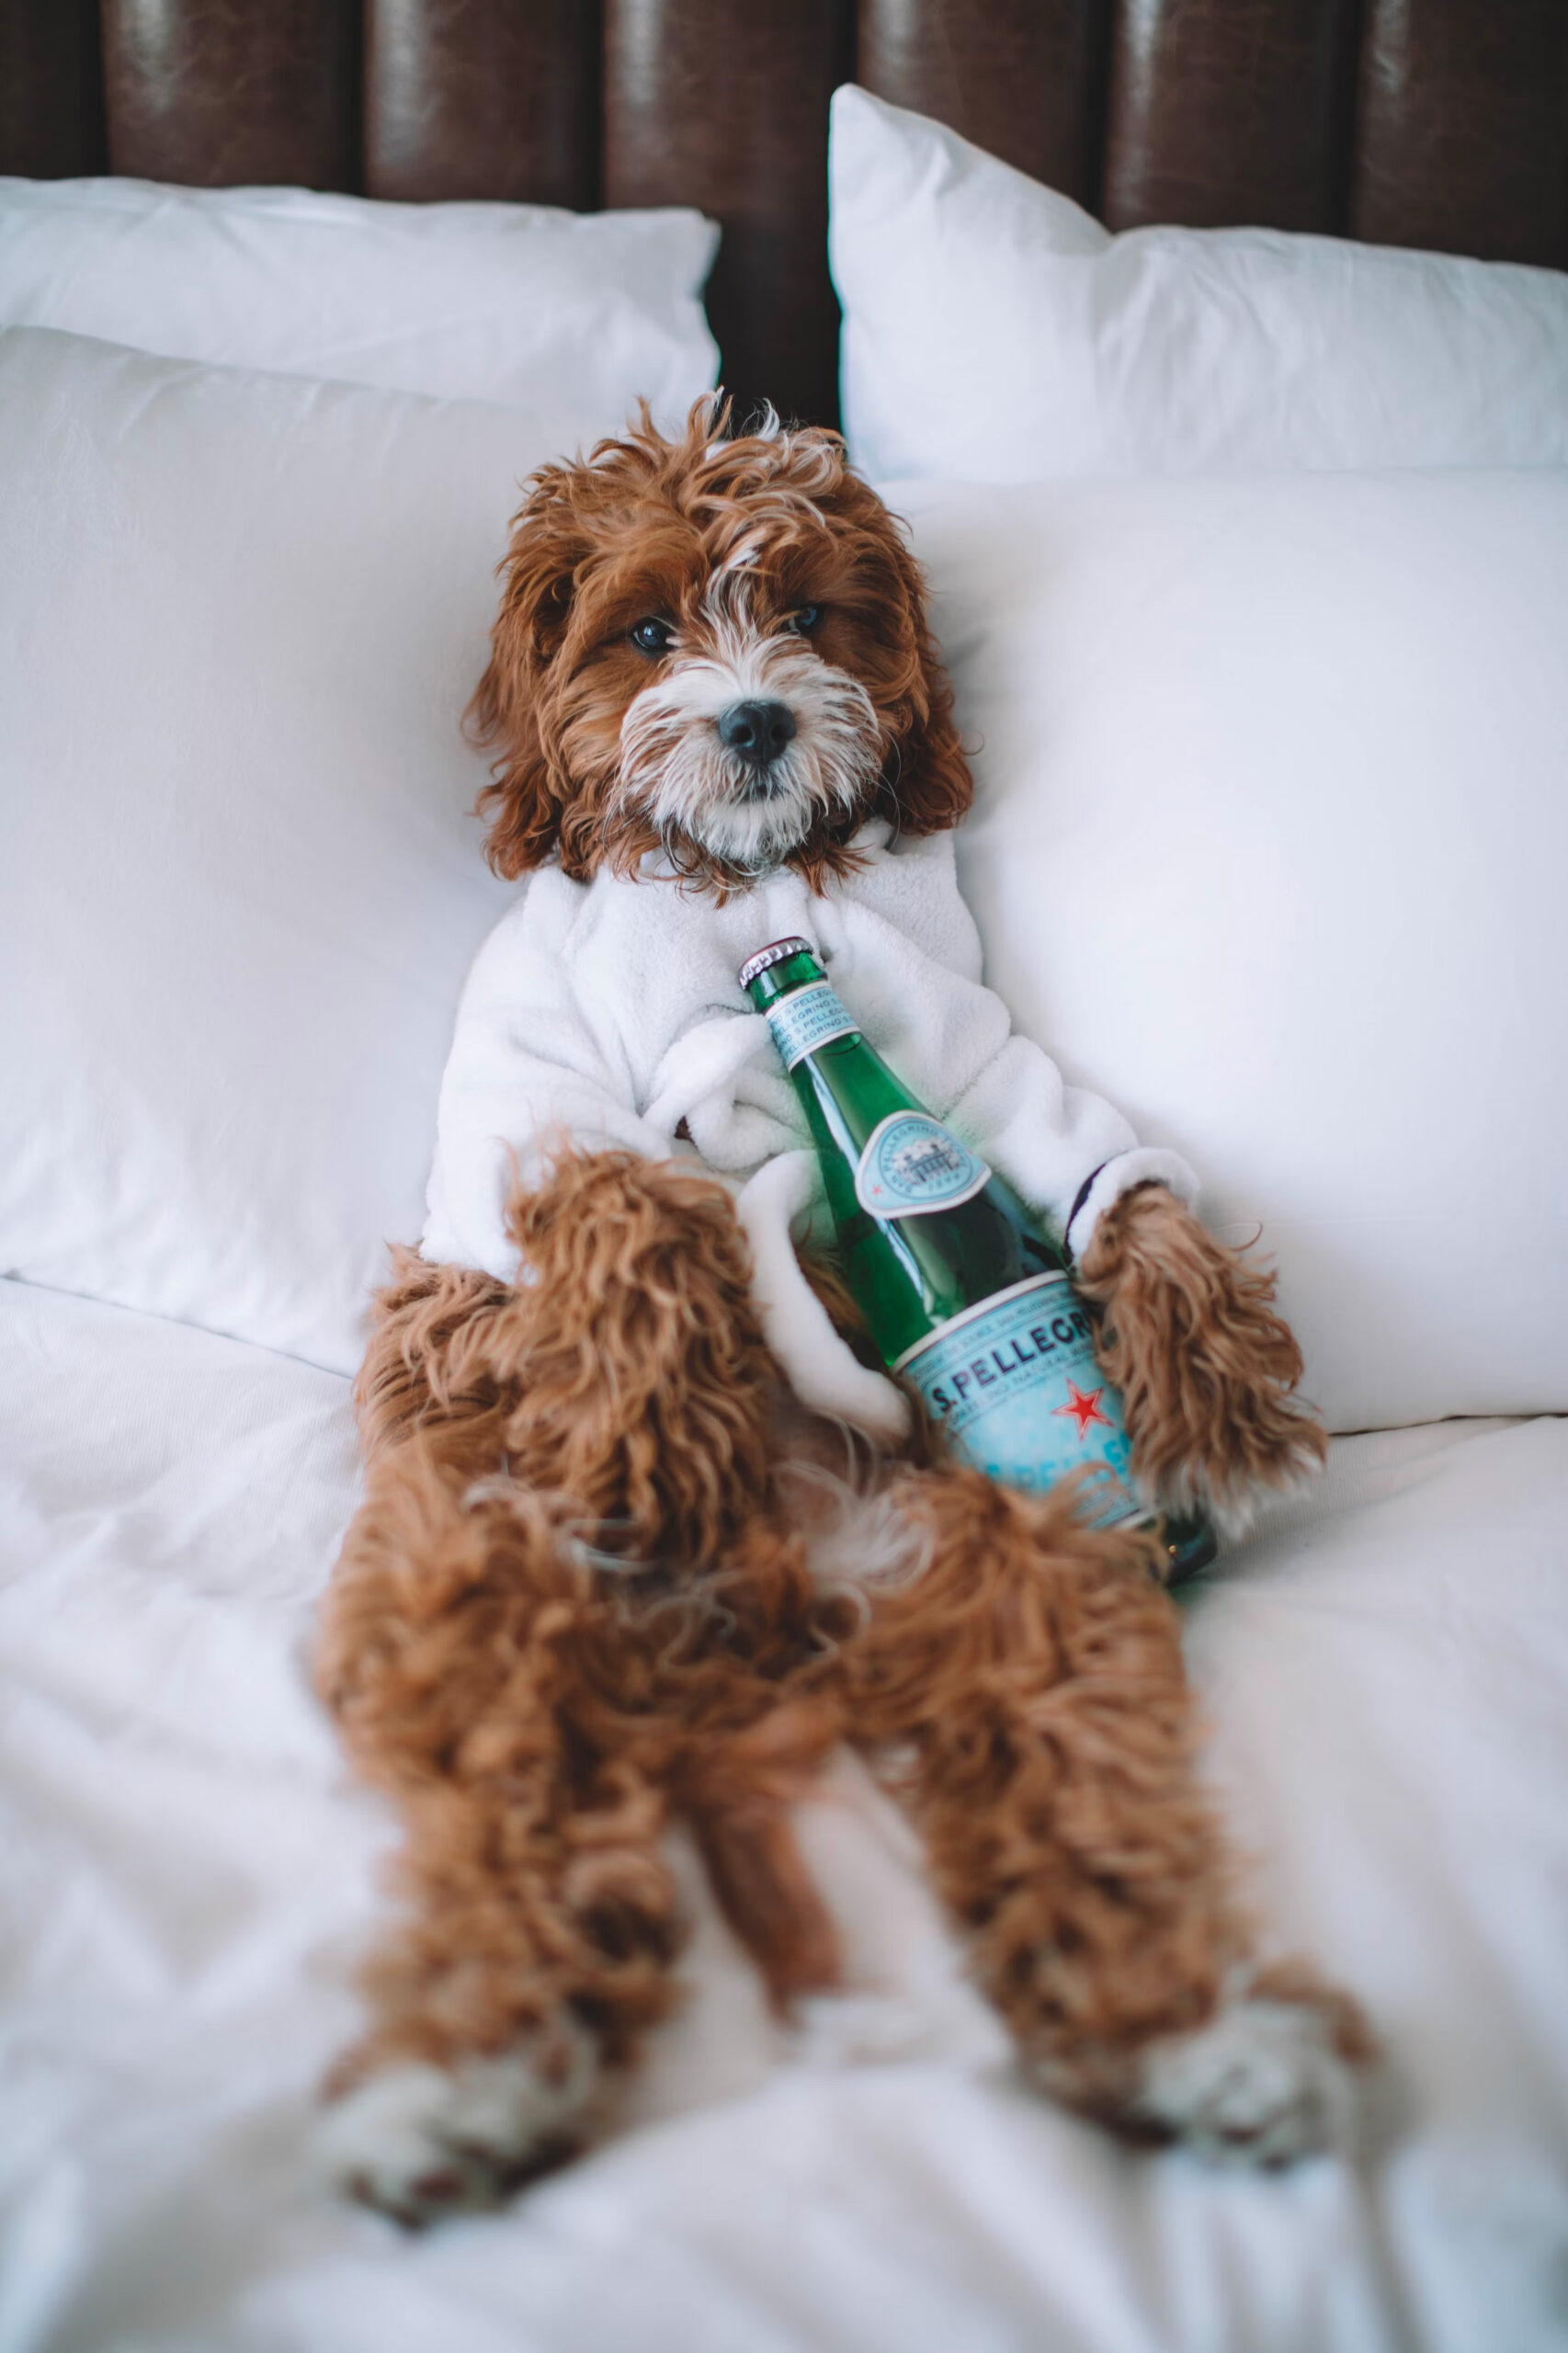 Amusing dog draped in a towel, playfully holding a beer bottle, in a hotel room, showcasing a light hearted and quirky moment during a stay